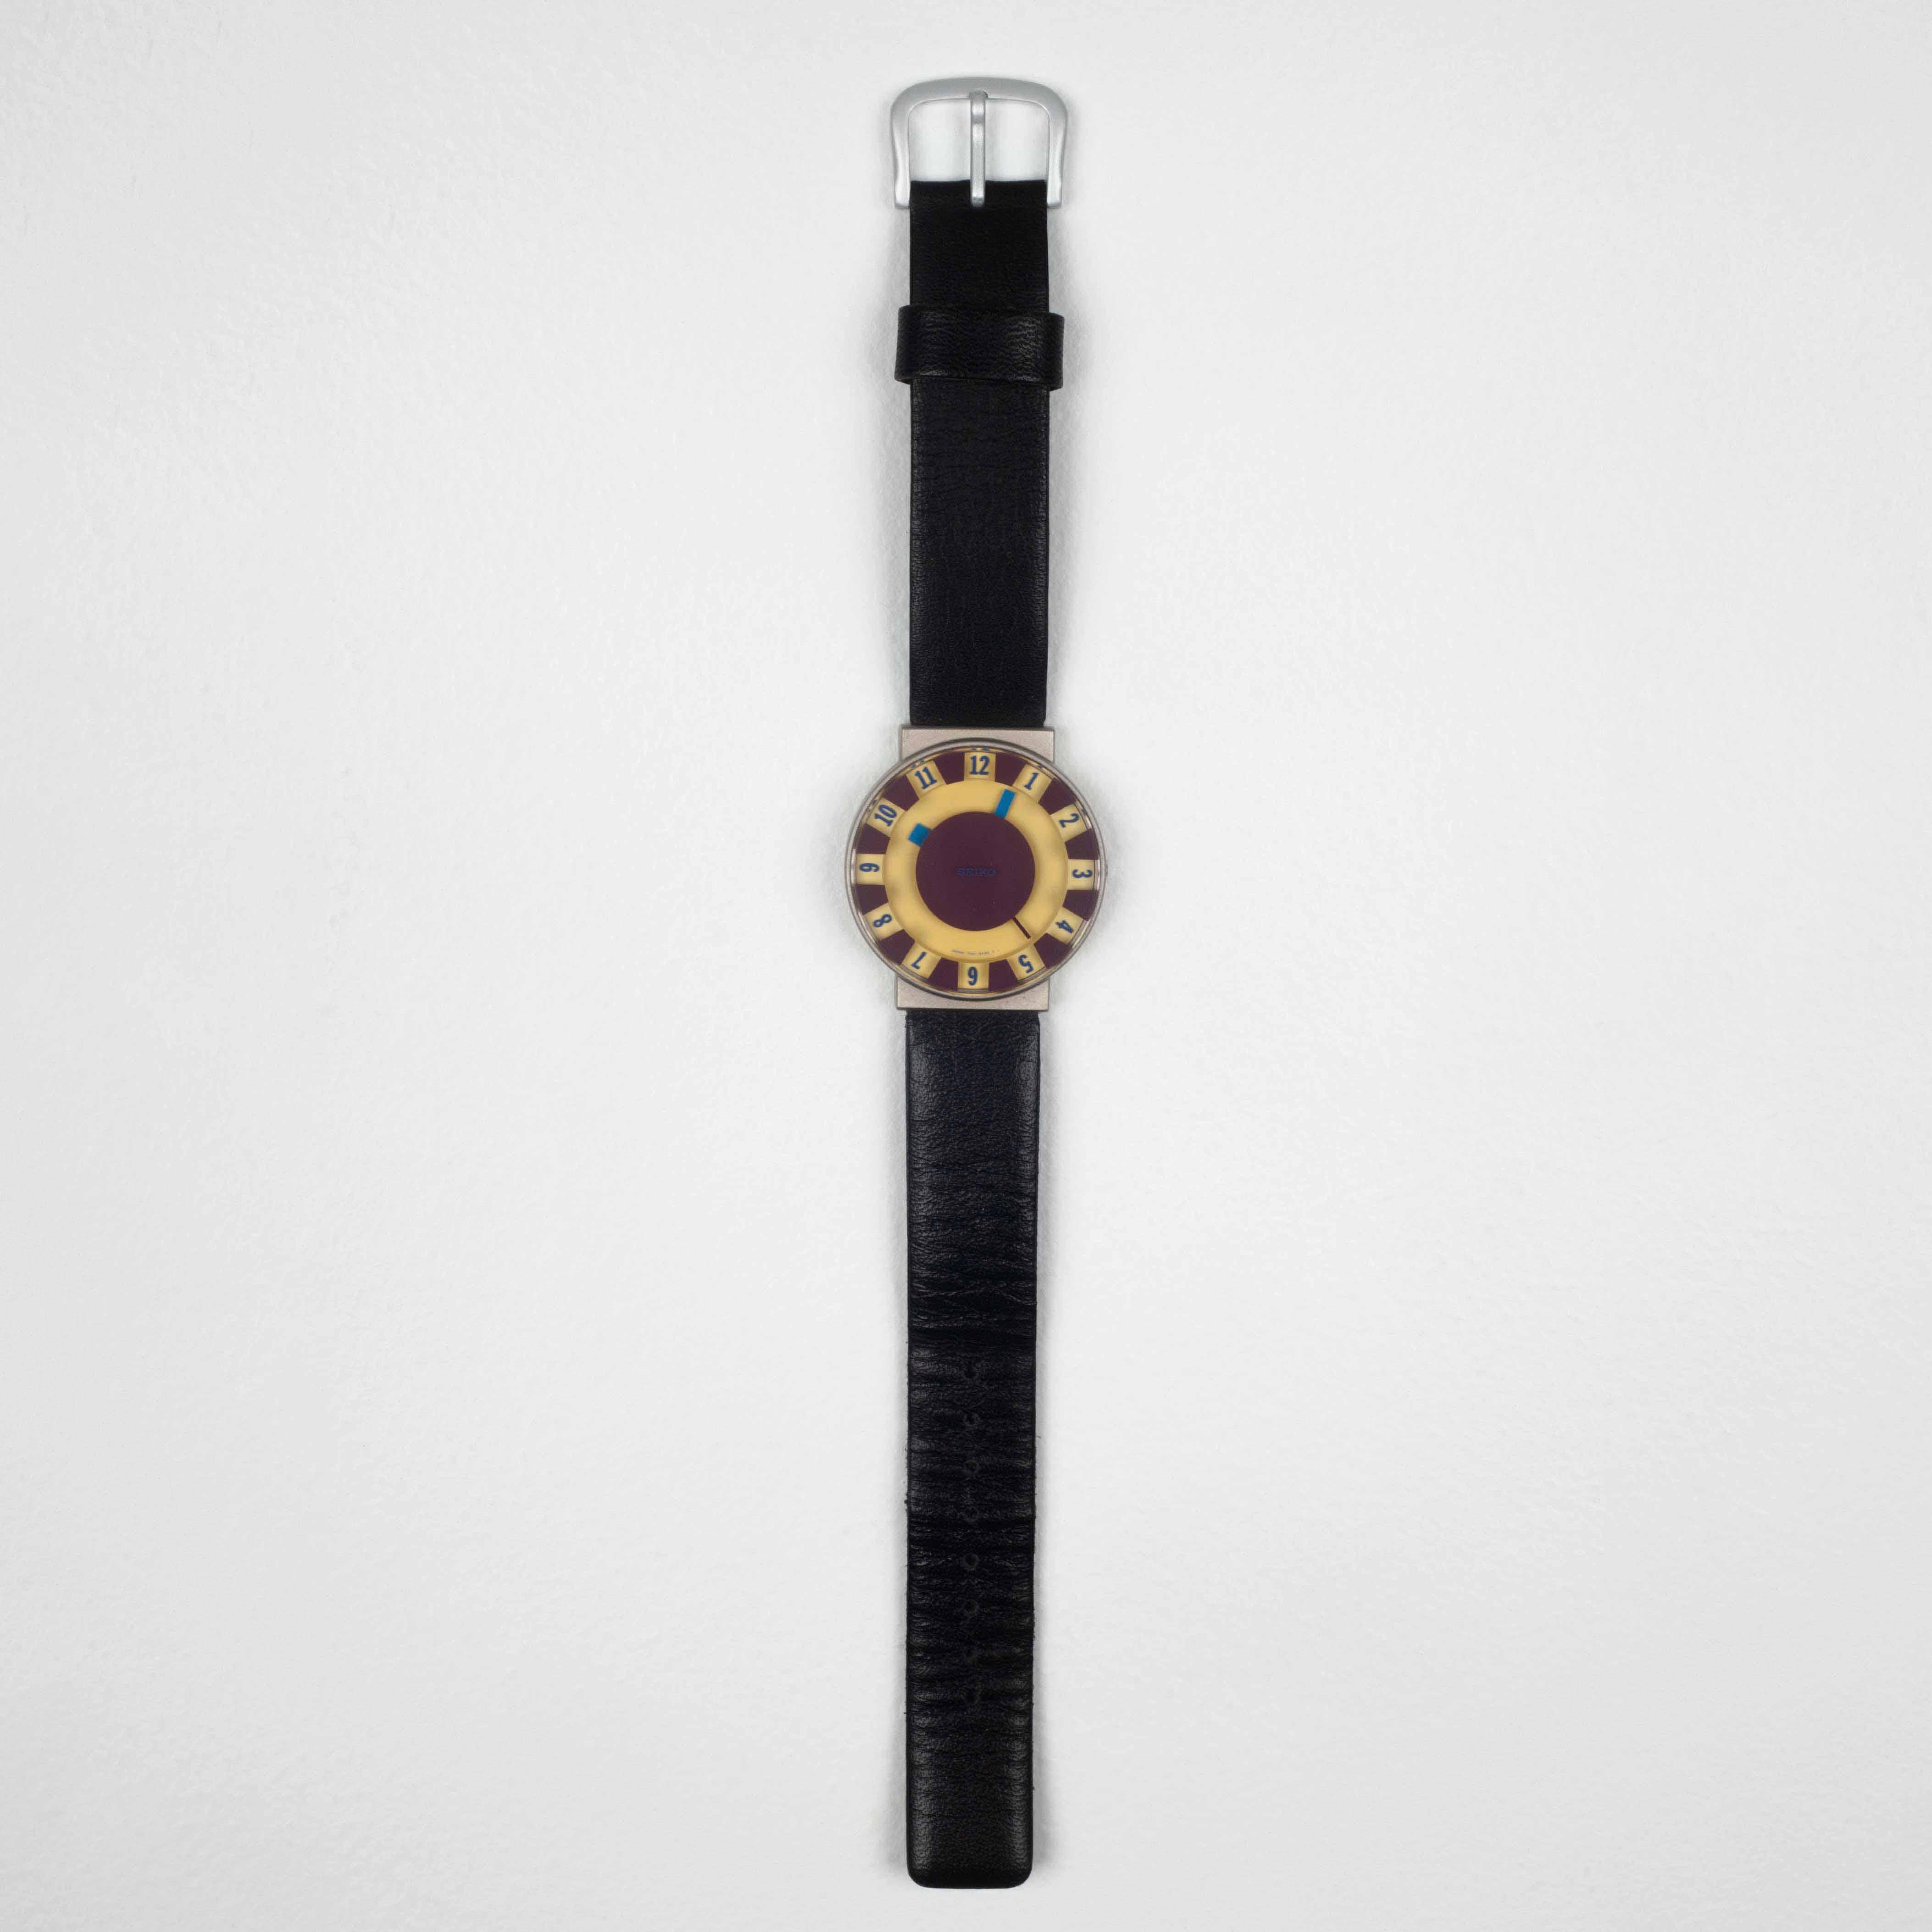 Stainless Steel Ettore Sottsass Watch, Collection Sottsass for Seiko, Japan, 1993